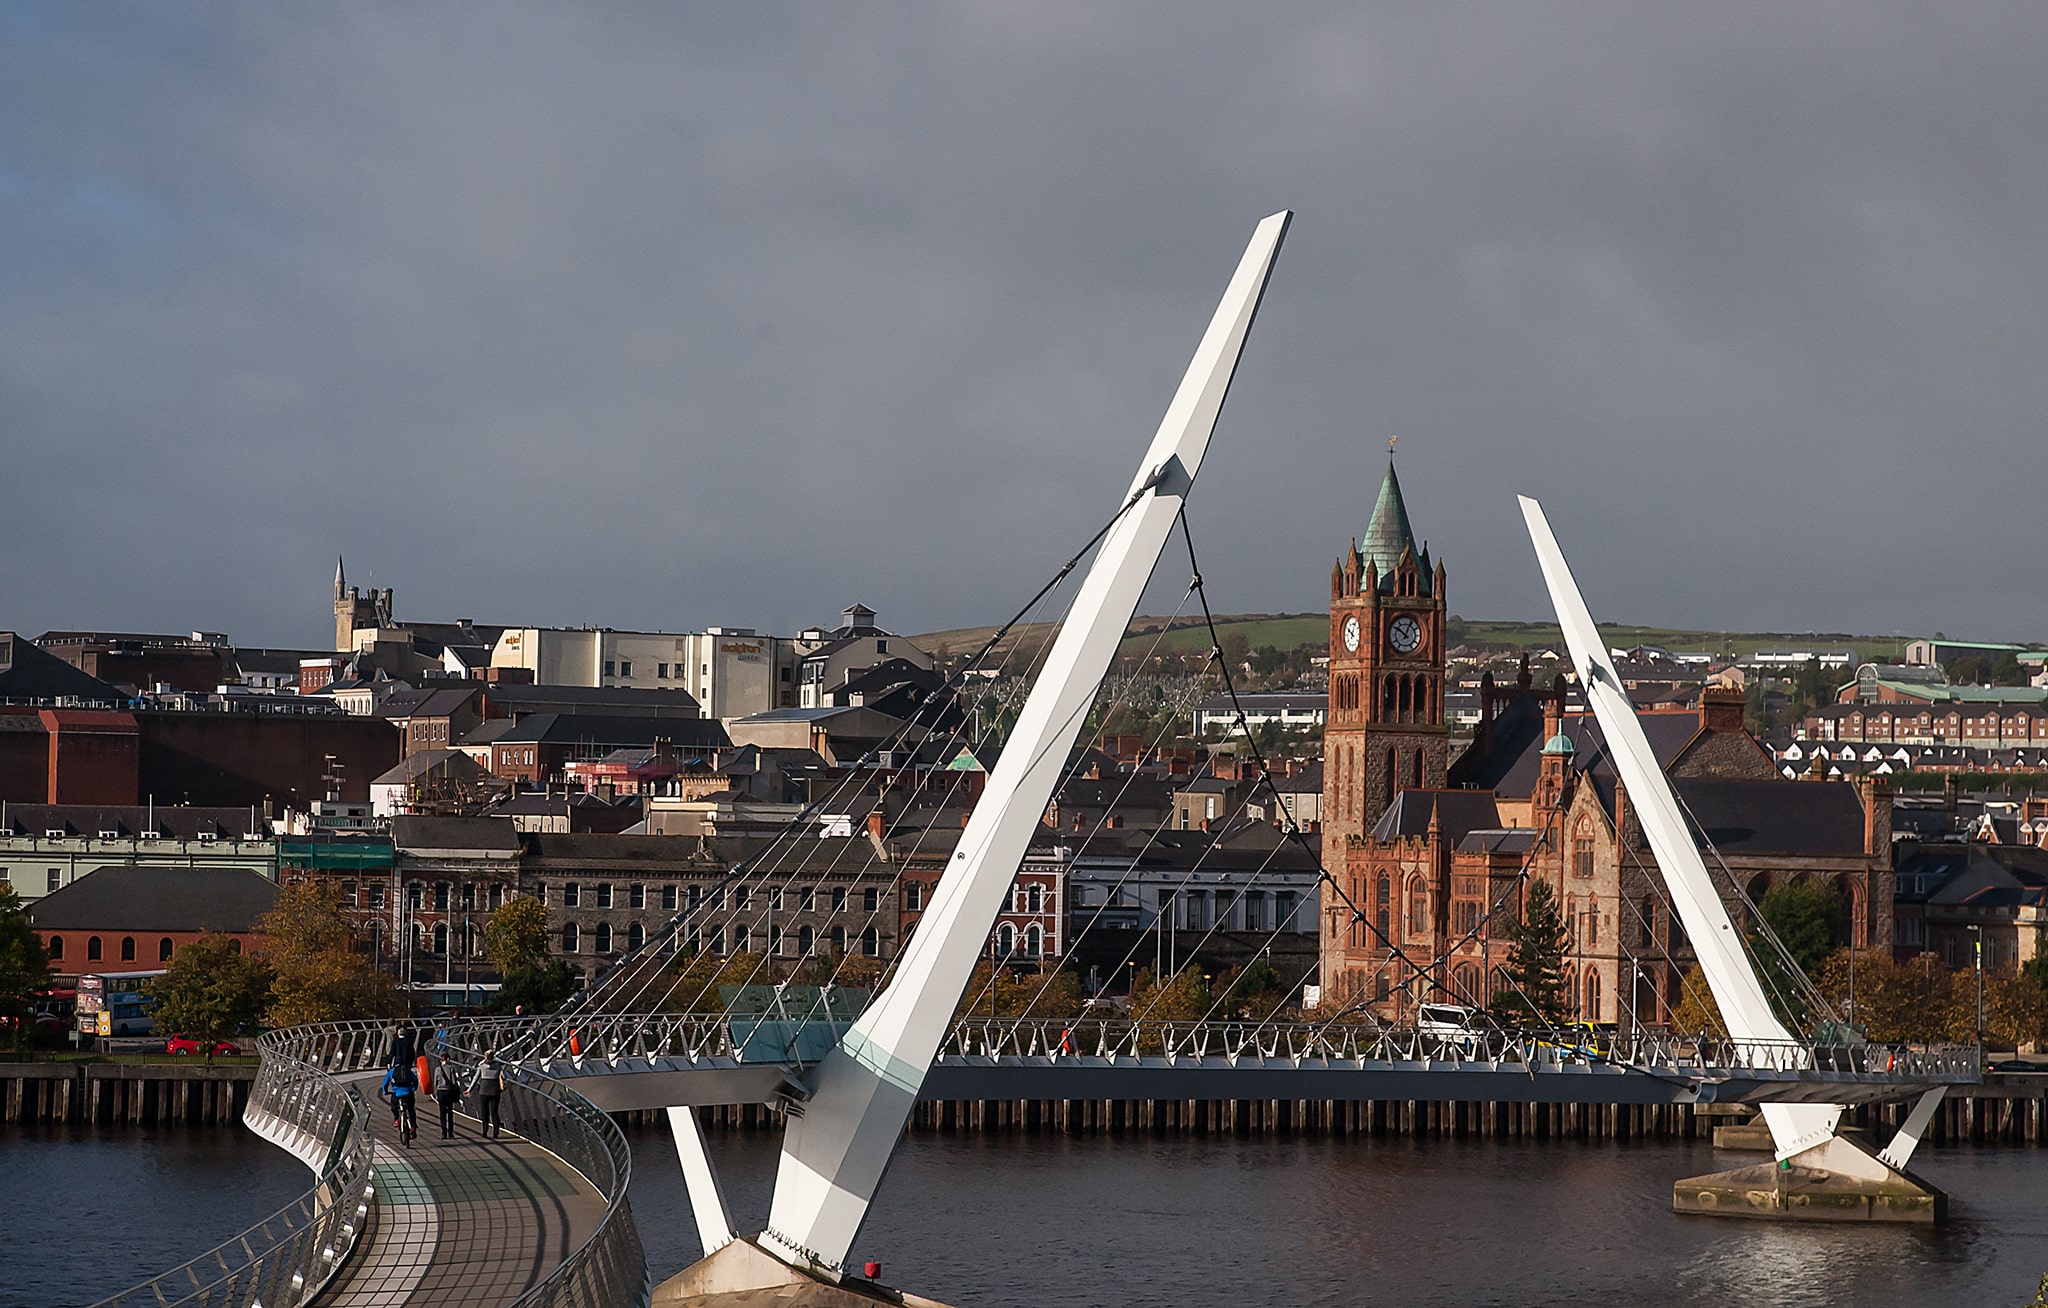 Derry, in Northern Ireland, is an awesome place to visit in Ireland